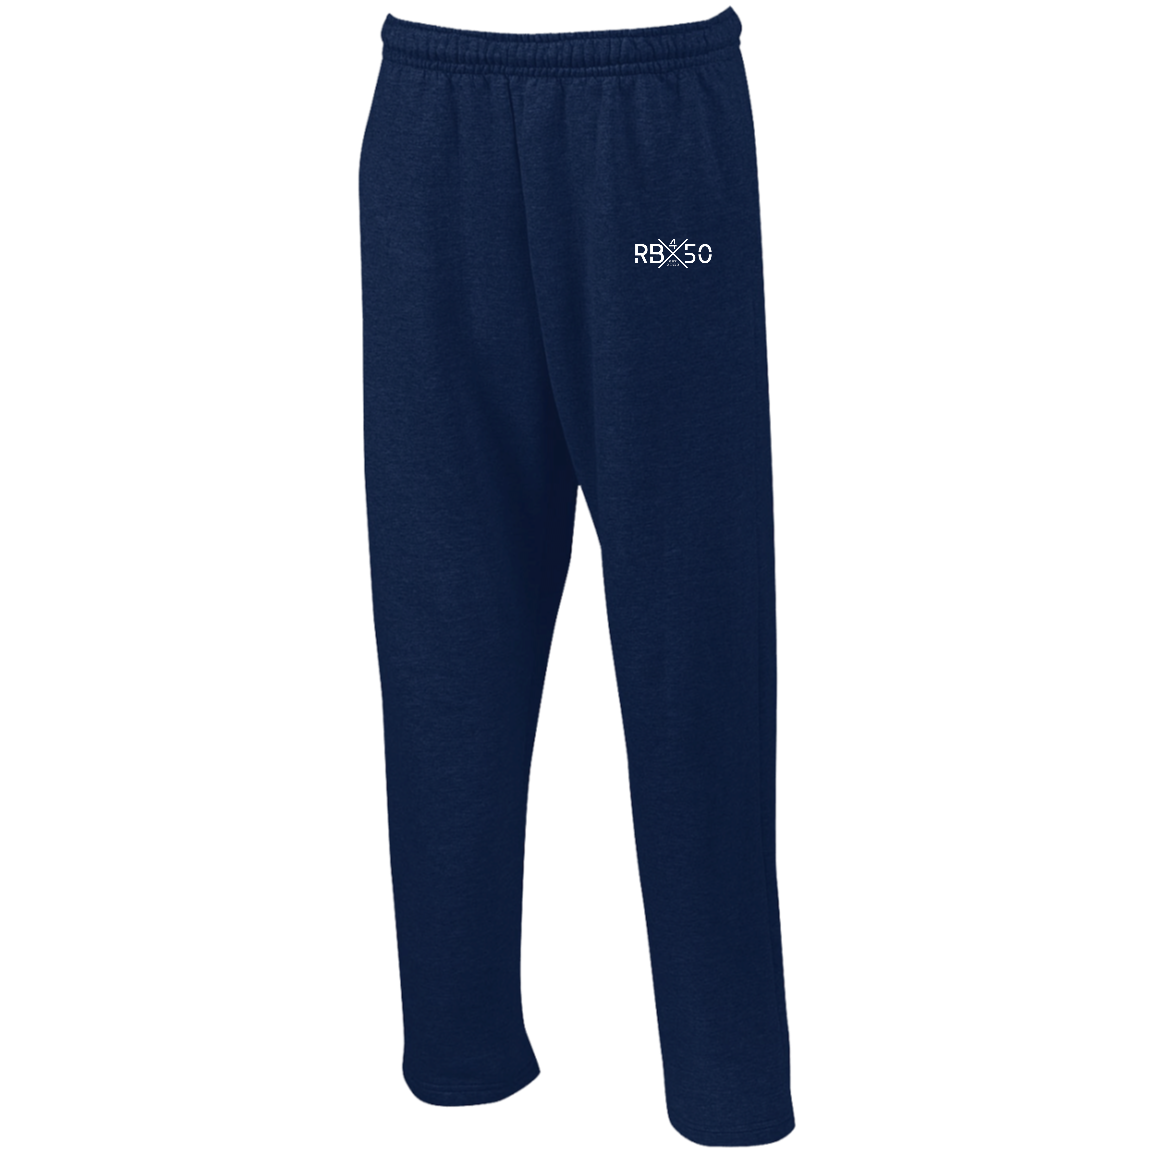 RB450 Open Bottom Sweatpants with Pockets